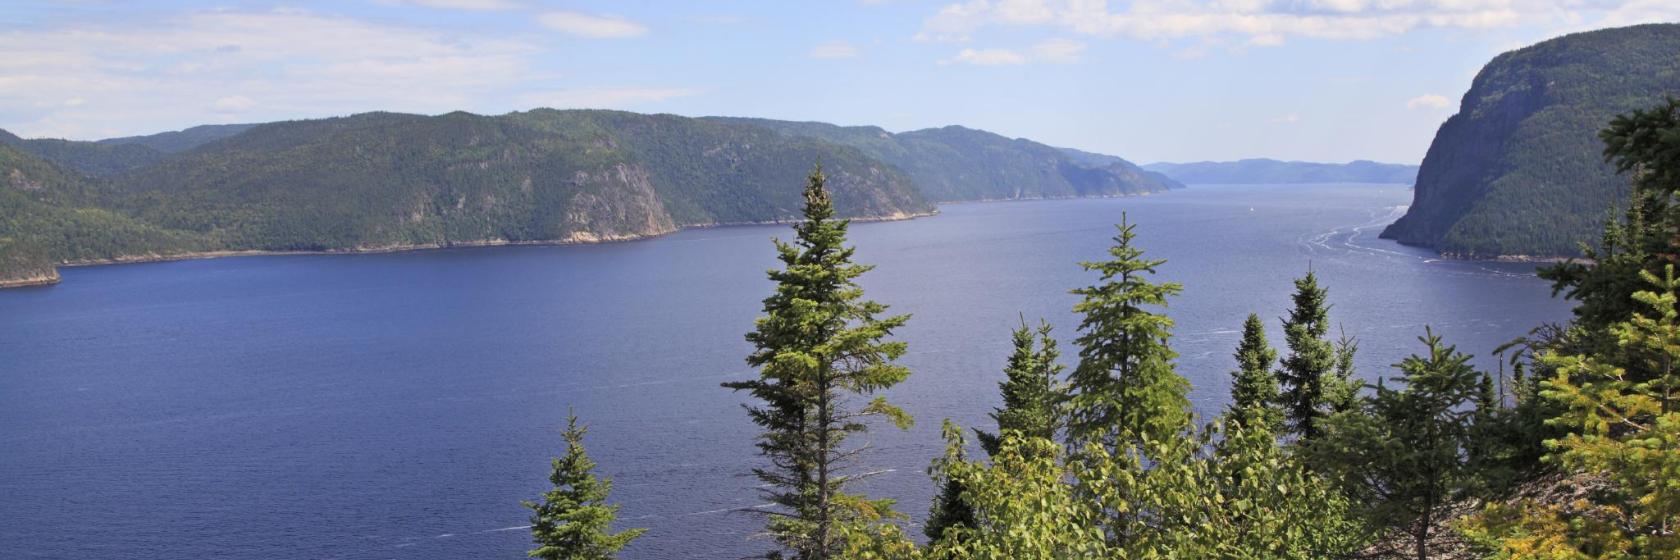 Hotels in Saguenay-Lac-Saint-Jean, Canada – save 15% with the best deals